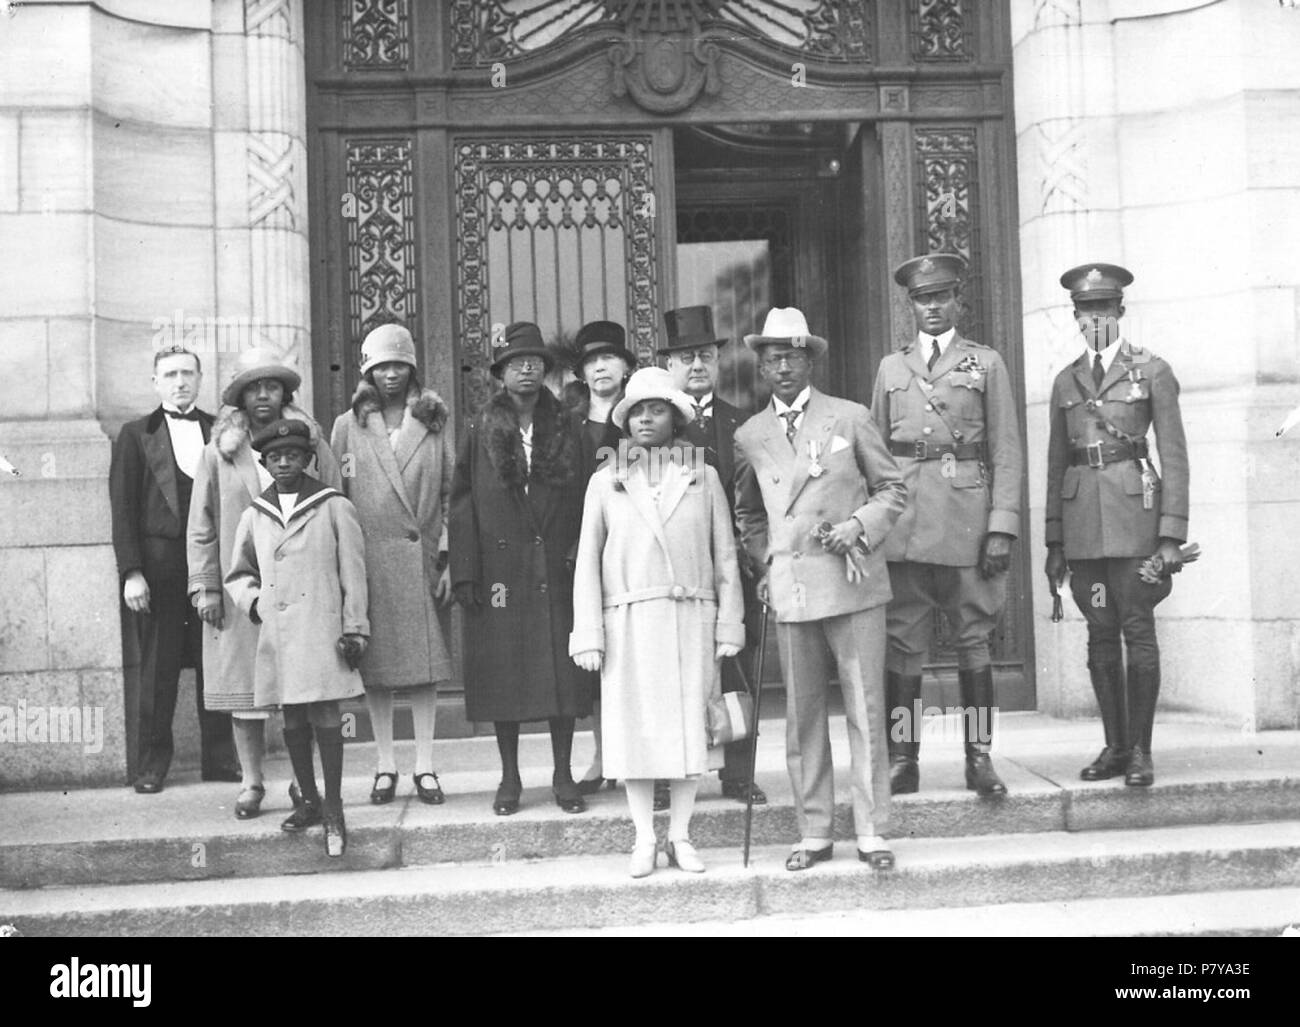 English: Charles D. B. King, 17th President of Liberia (1920-1930), with his entourage on the steps of the Peace Palace, The Hague (the Netherlands). Dated Thursday 29 September 1927. Photo collection Carnegie Foundation. 29 September 1927 245 LiberiaKing Stock Photo